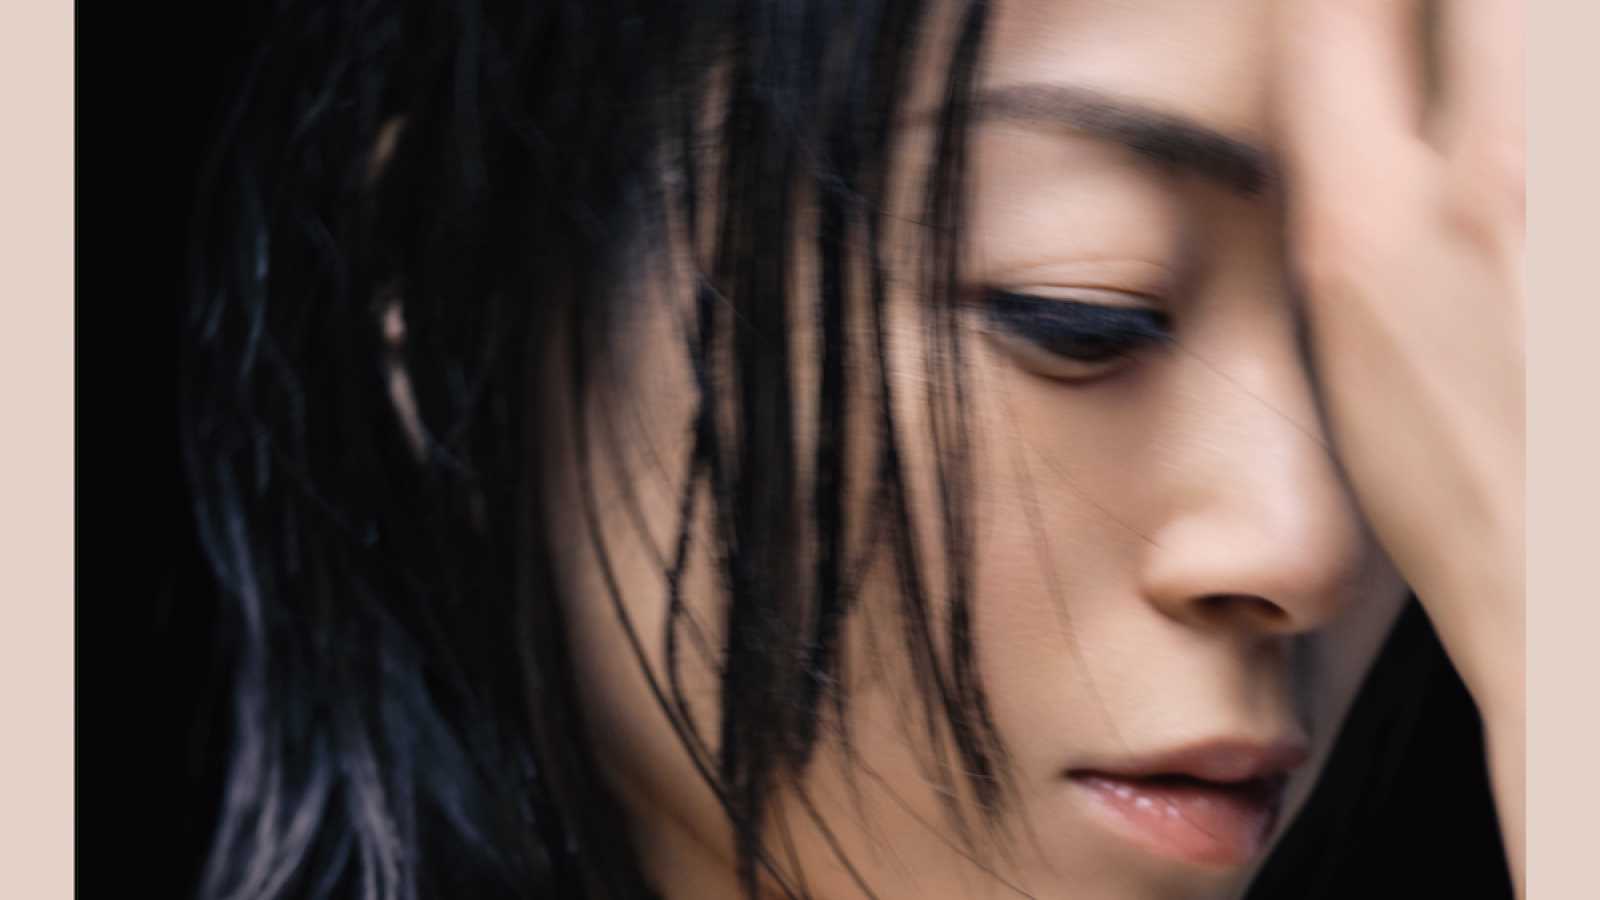 New Album from Utada Hikaru © Sony Music Labels Inc. All rights reserved.